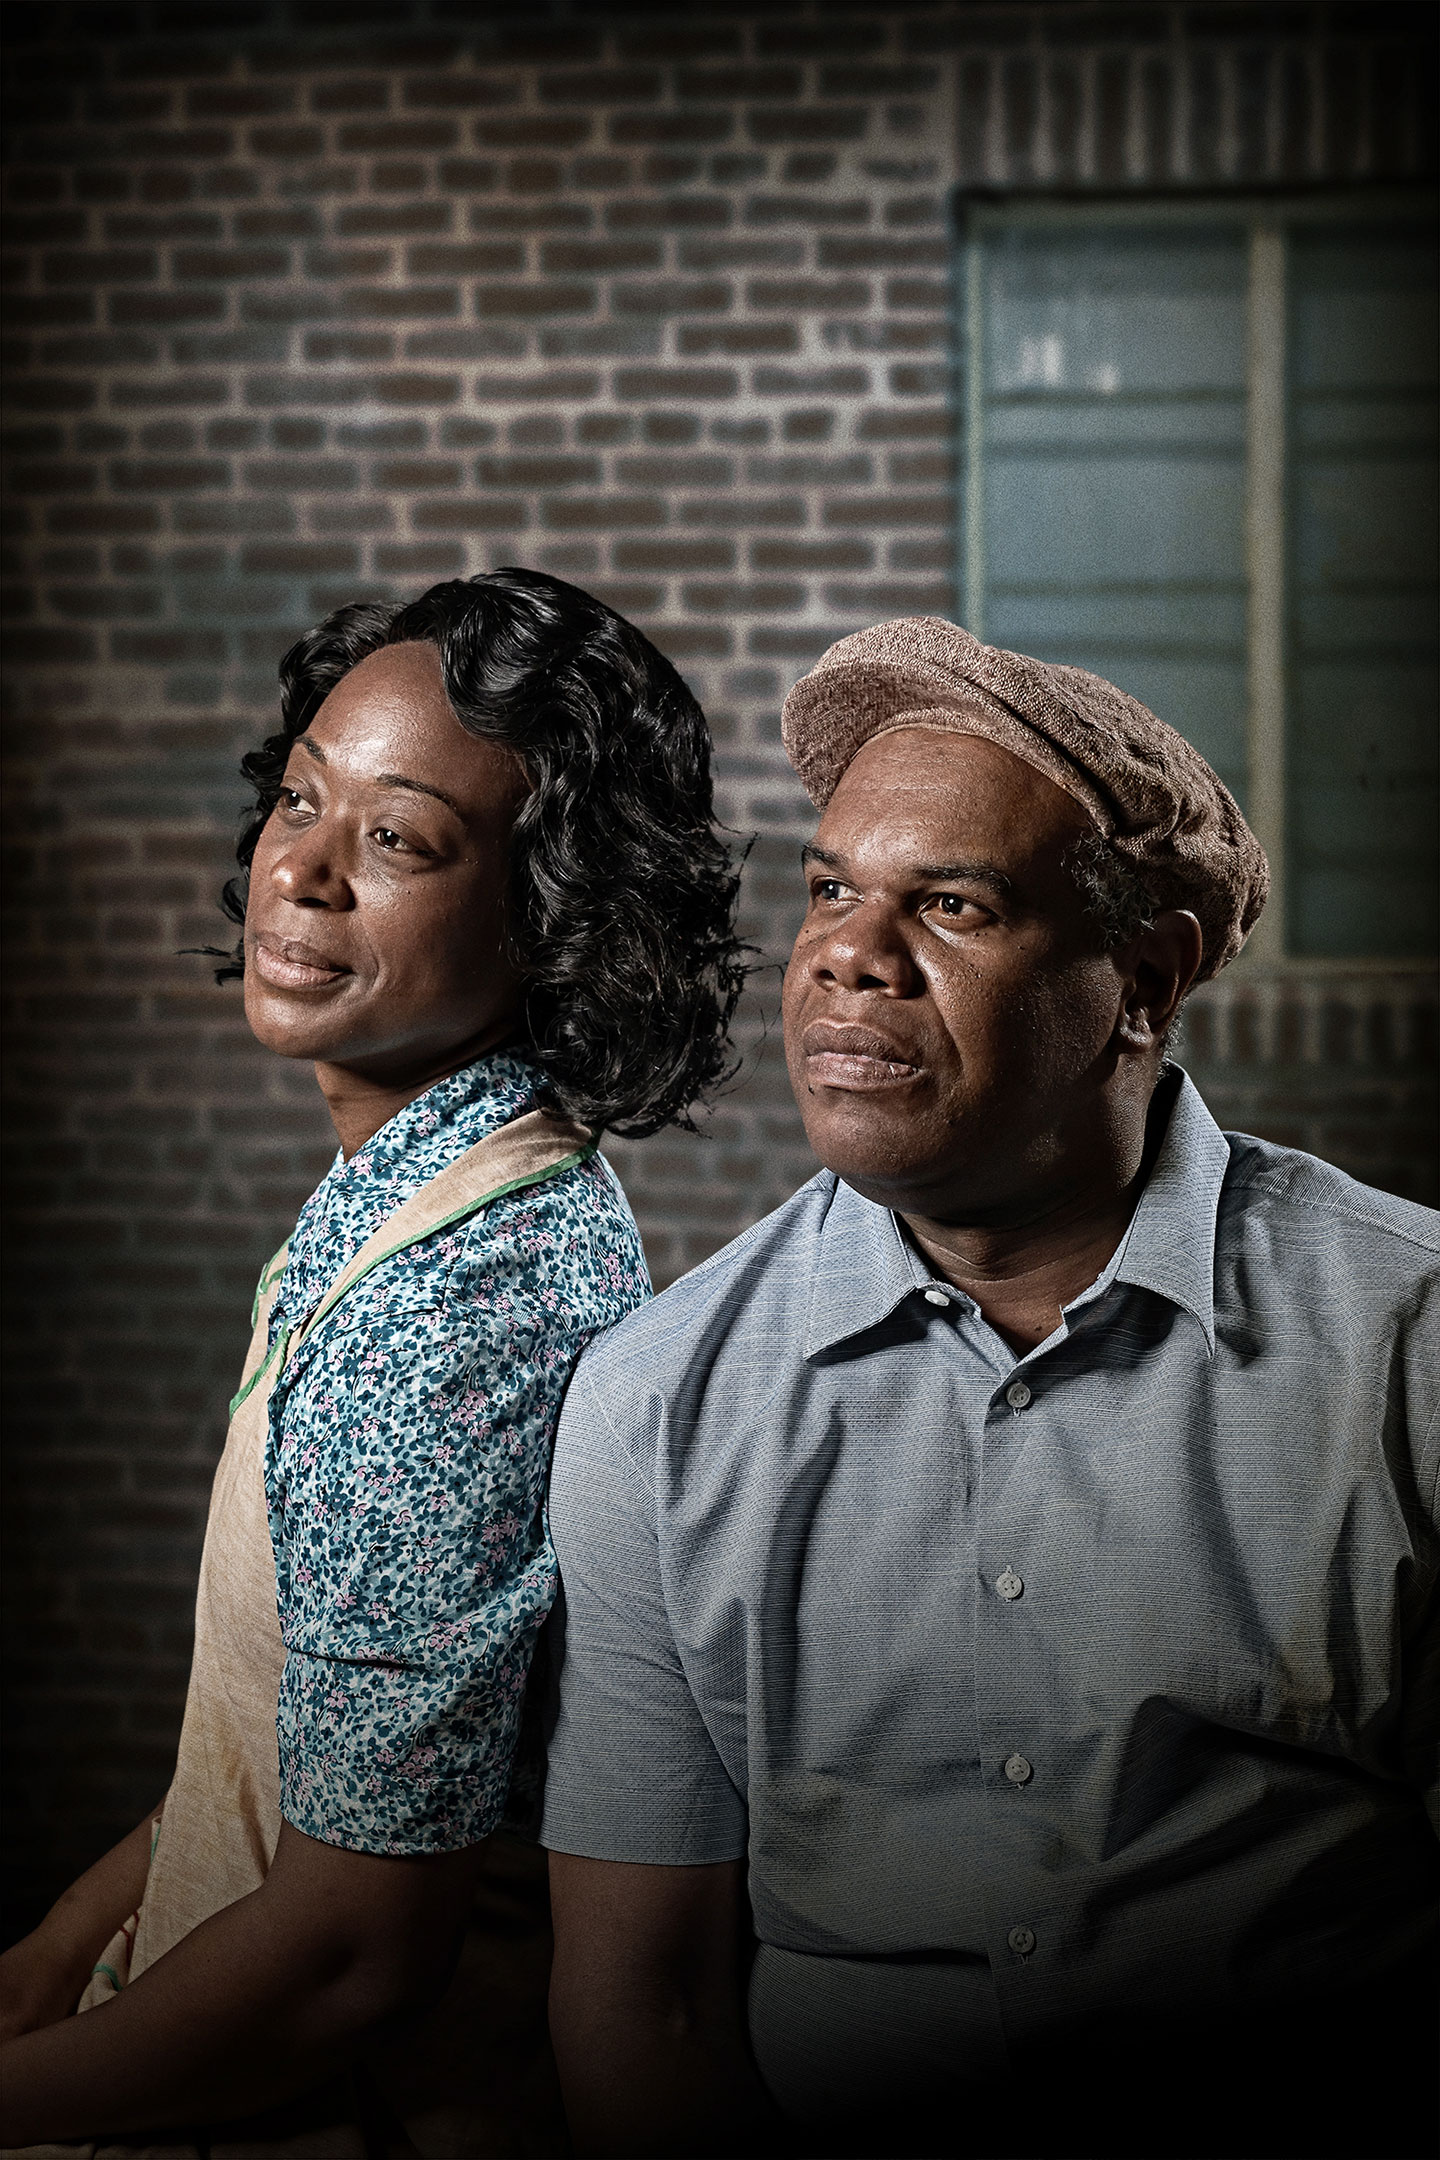 Actors playing August Wilson’s characters Rose and Troy from the play “Fences” sit together in their 1950s costumes. Rose wears a tan apron over a short-sleeved house dress that is patterned with small blue flowers. Troy wears khakis, a short-sleeved blue button-down shirt and a tan linen cap.